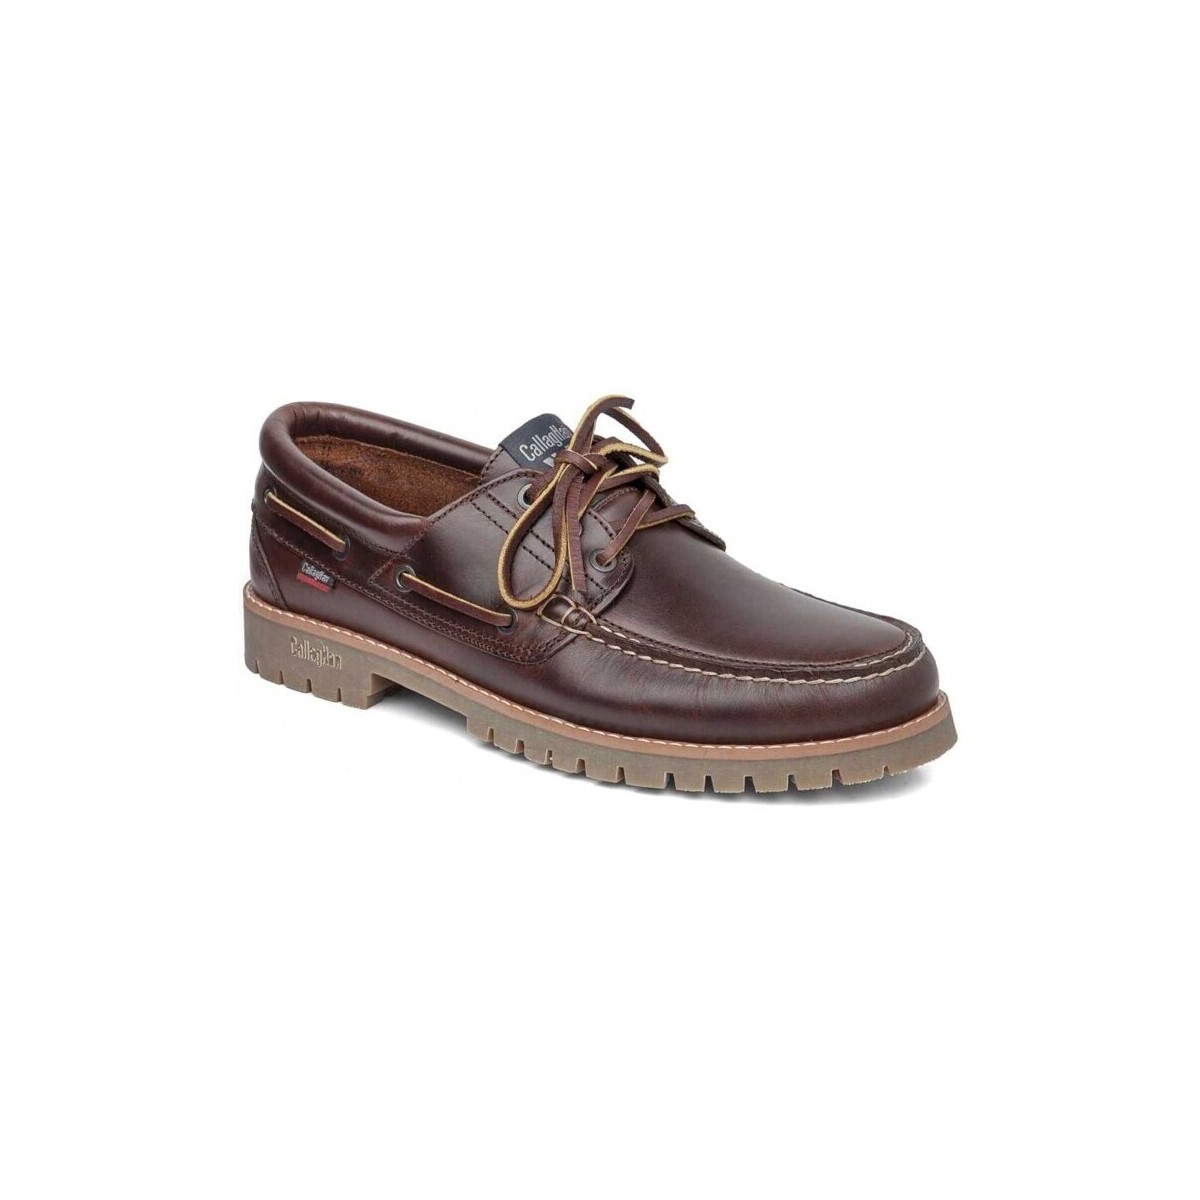 Boat shoes CallagHan 24151-24